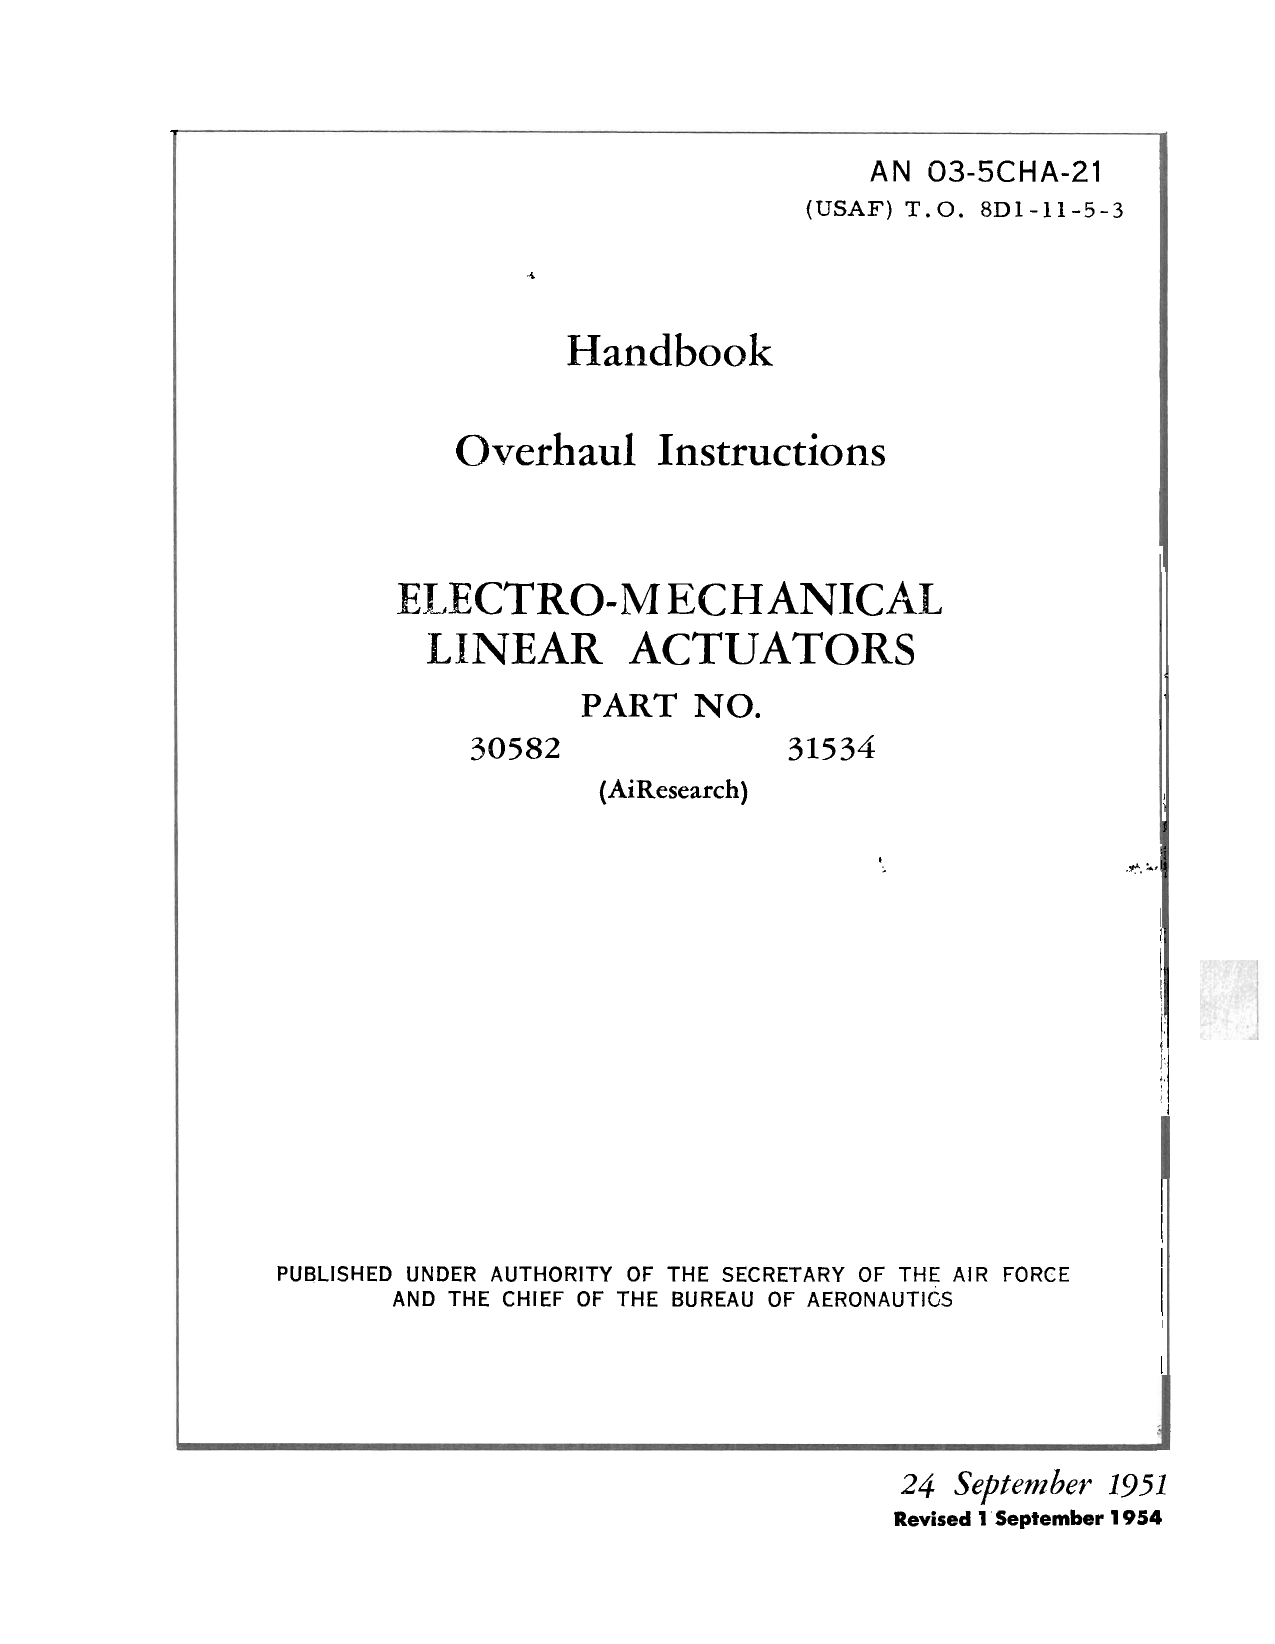 Sample page 1 from AirCorps Library document: Overhaul Instructions for Electro-Mechanical Linear Actuators - Parts 30582 and 31534